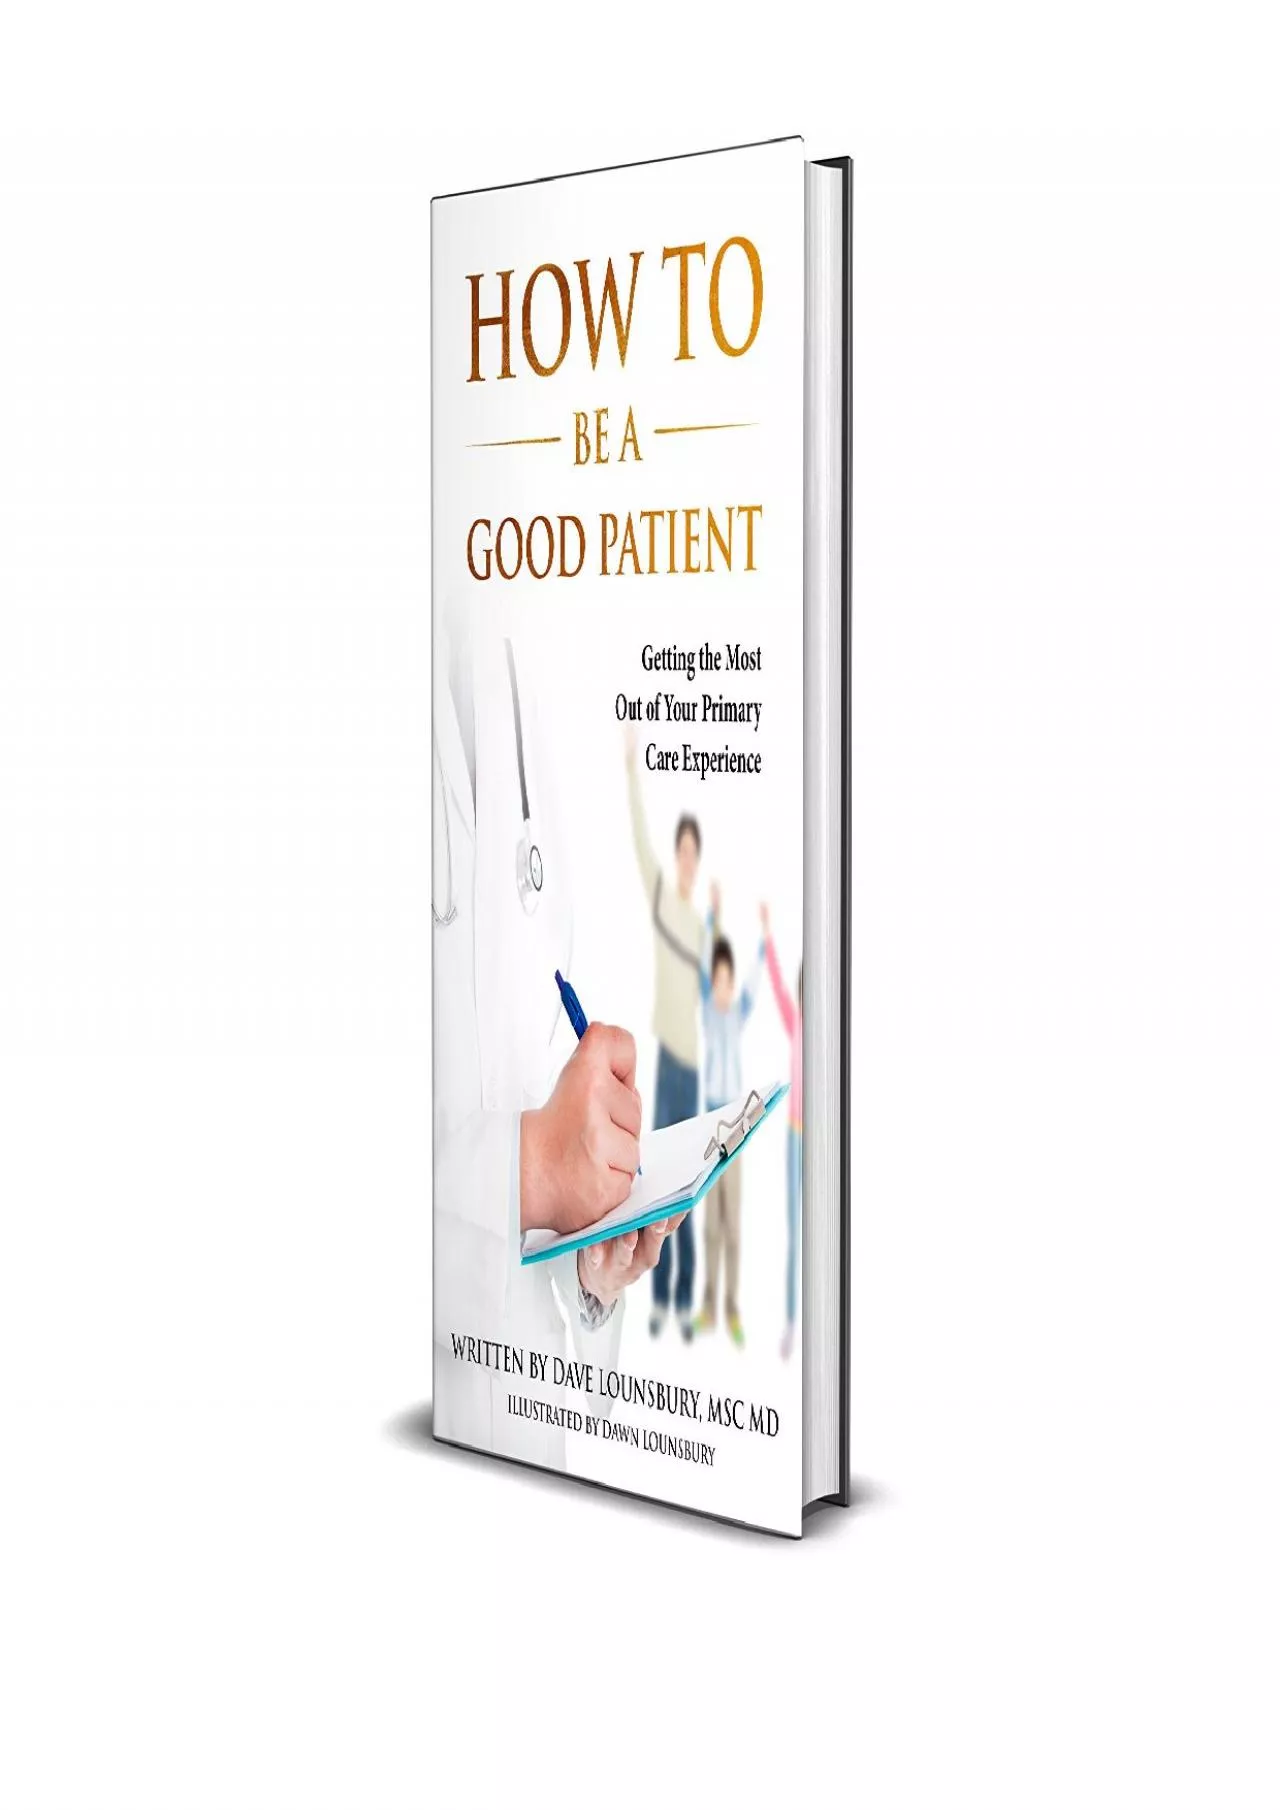 (READ)-How to Be a Good Patient: Understanding Your Primary Care Provider